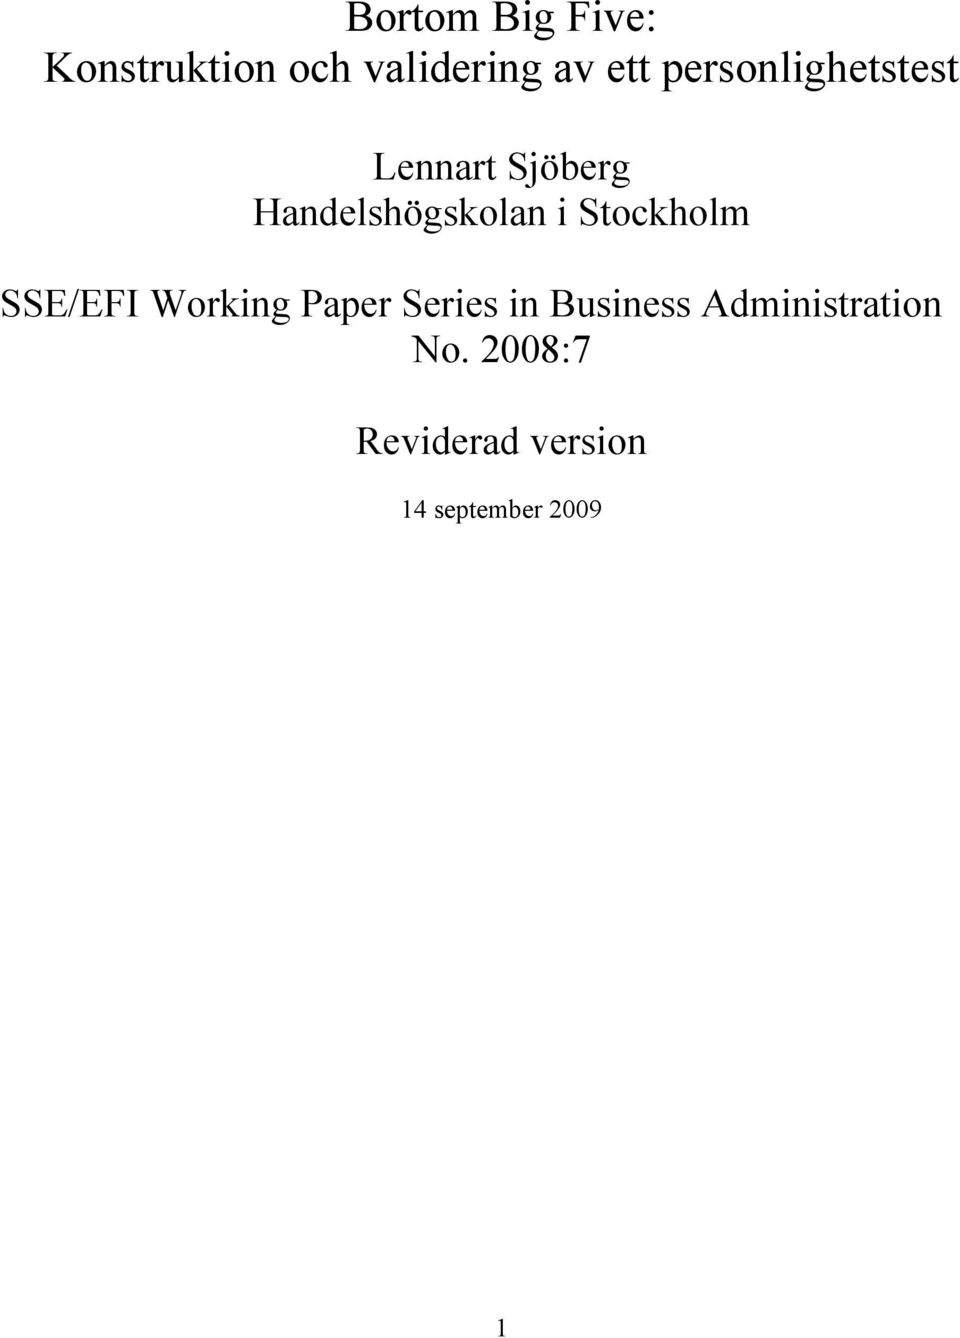 Stockholm SSE/EFI Working Paper Series in Business